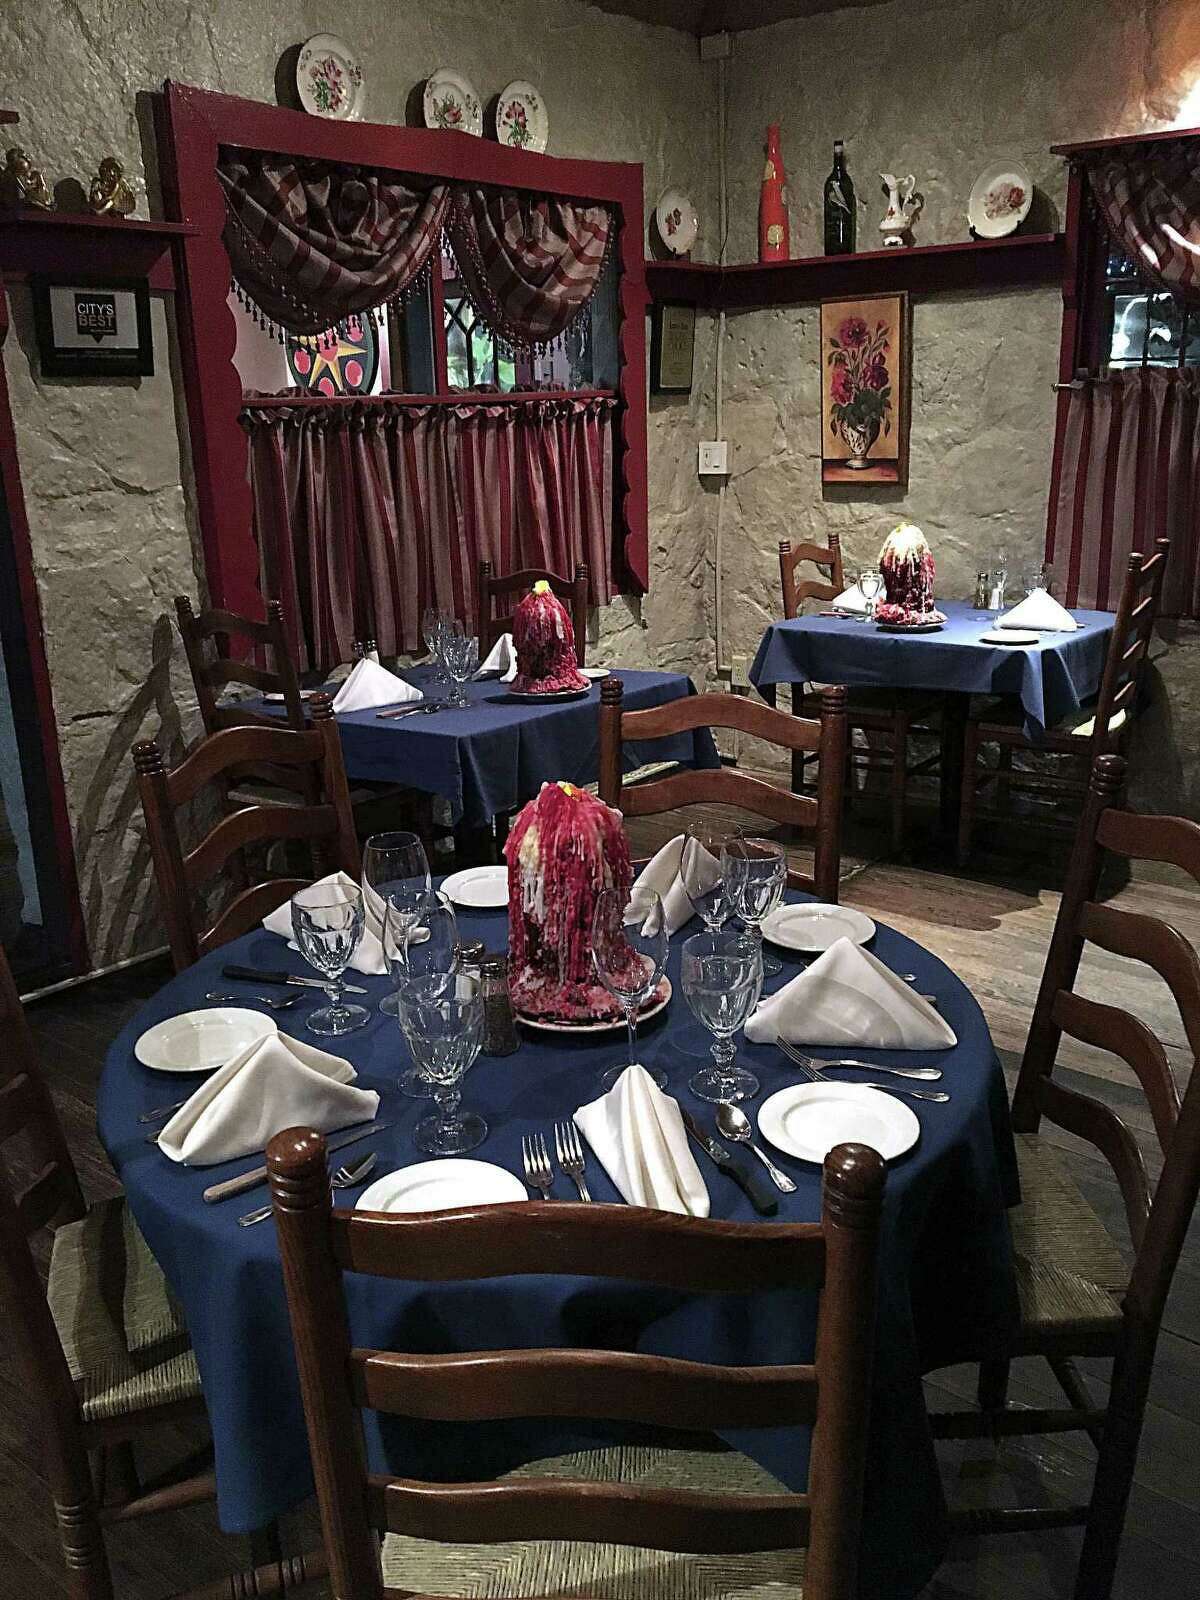 The rustic style of the Grey Moss Inn dining room dated back to its origins nearly 100 years ago as part of the Scenic Loop Playground, promoted by its developer as a woody retreat for the building of log cabins and rock lodges.